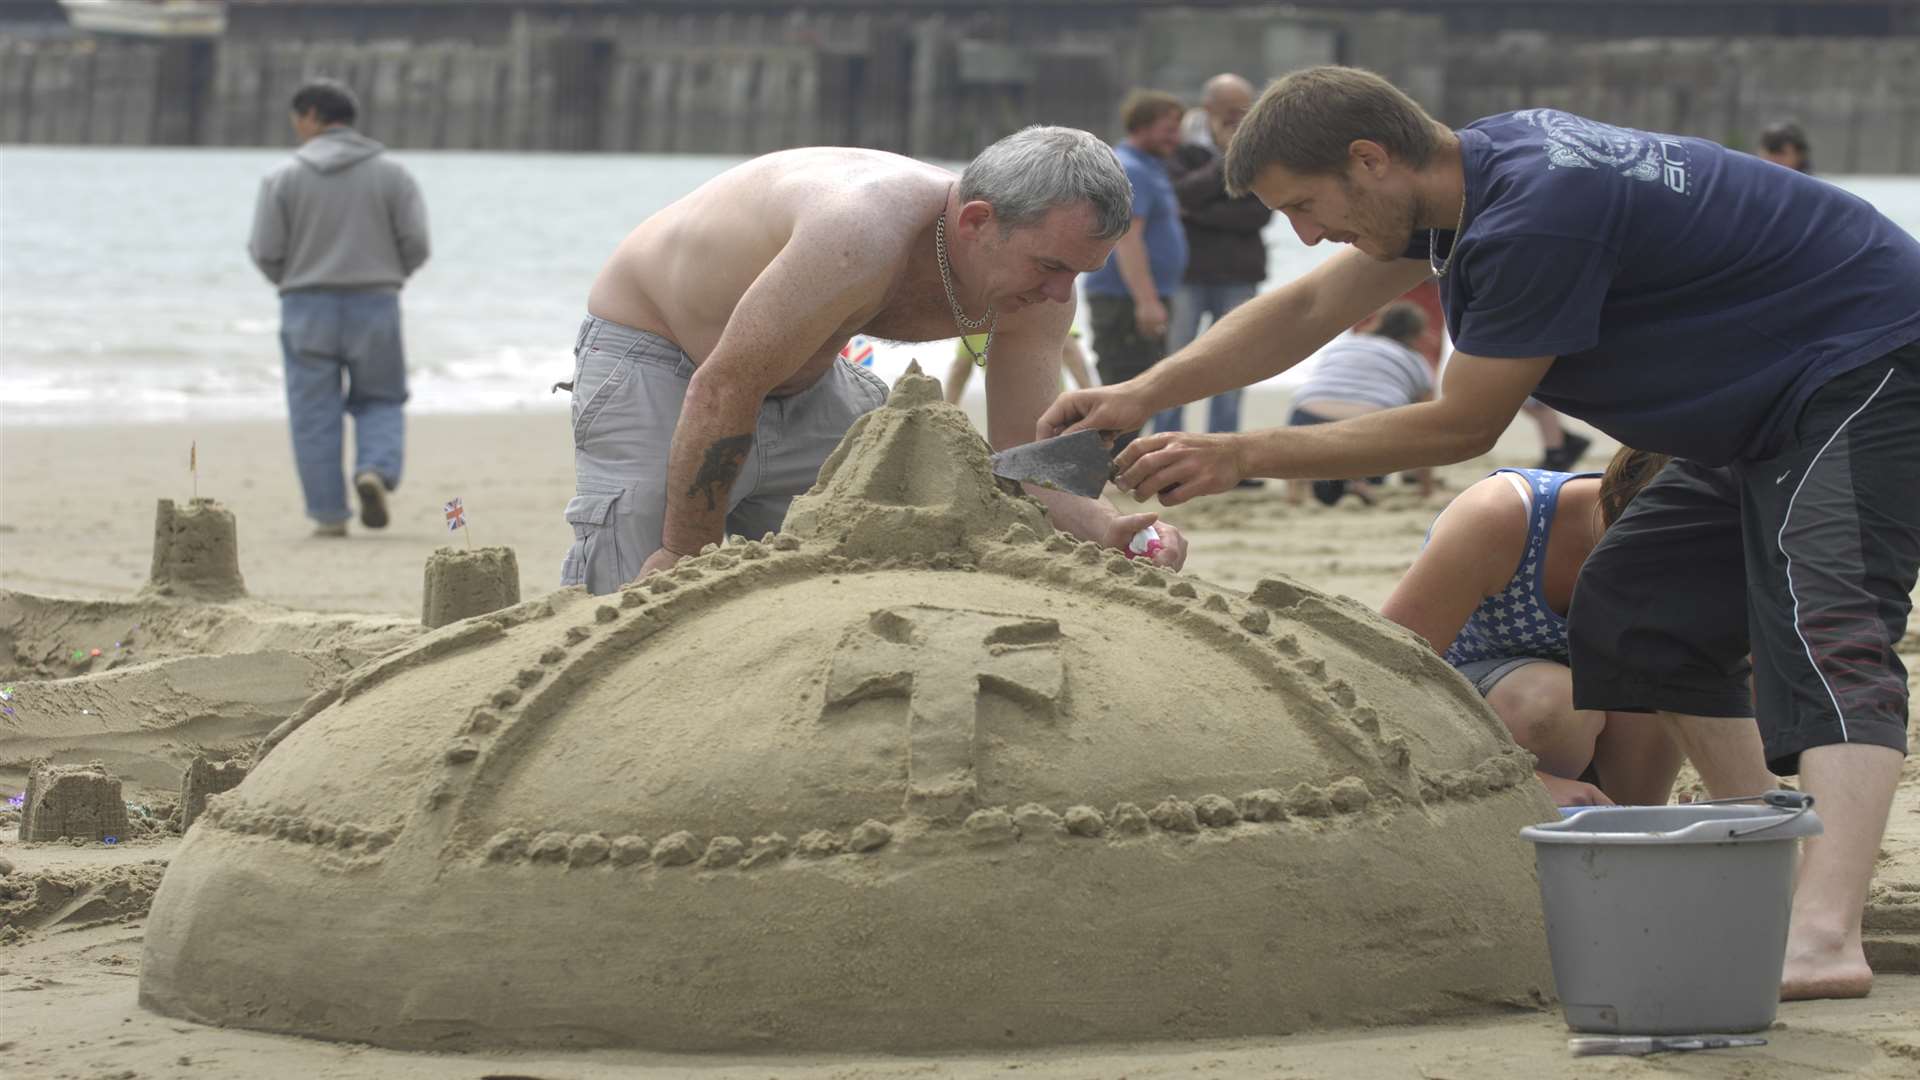 The competition takes place on Sunny Sands